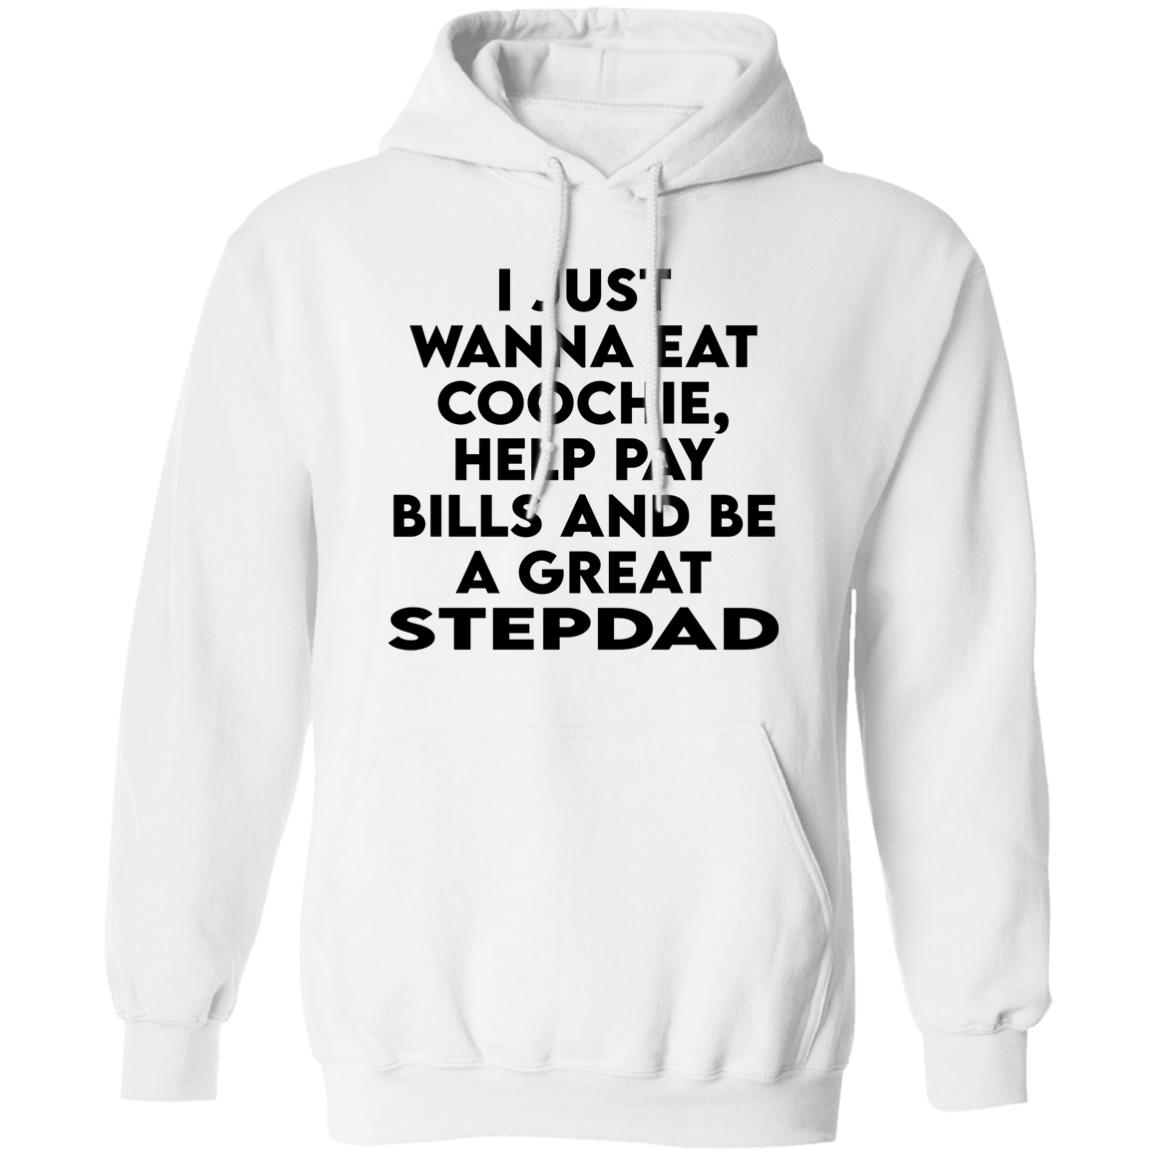 I Just Wanna Eat Coochie Help Pay Bills And Be A Great Stepdad Shirt Panetory – Graphic Design Apparel &Amp; Accessories Online